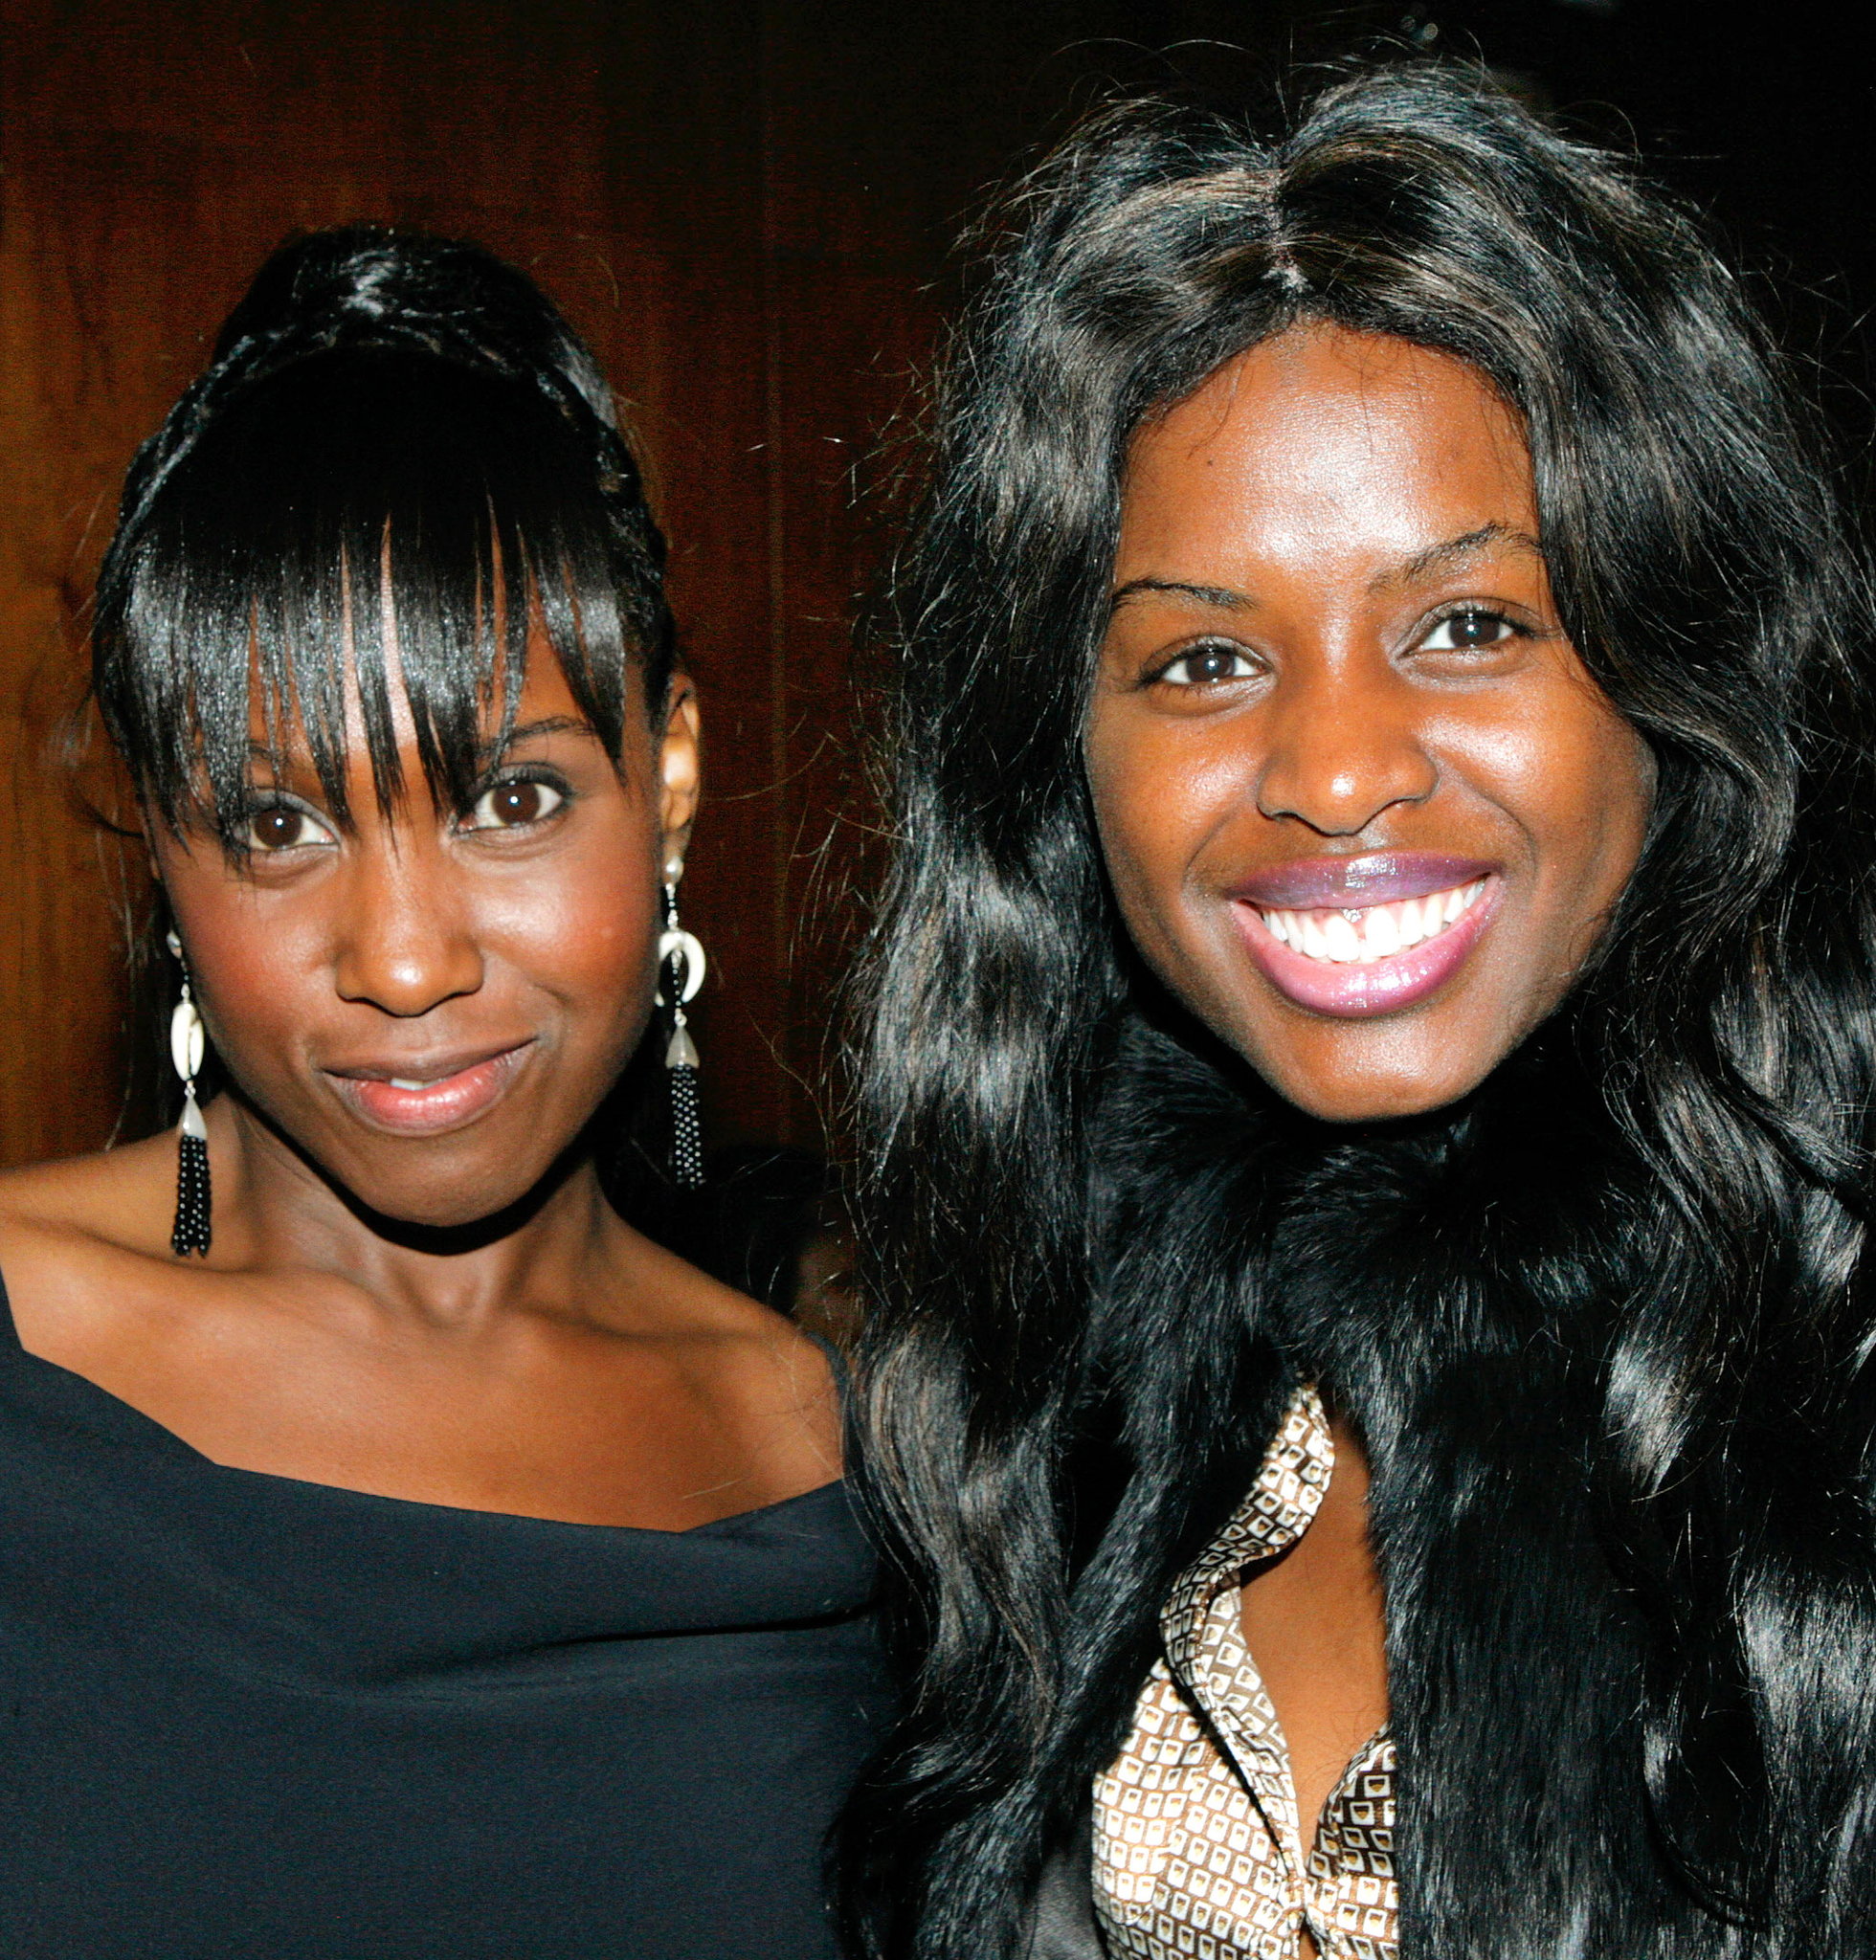 Michelle Gayle and June Sarpong at event of Joy Division (2006)